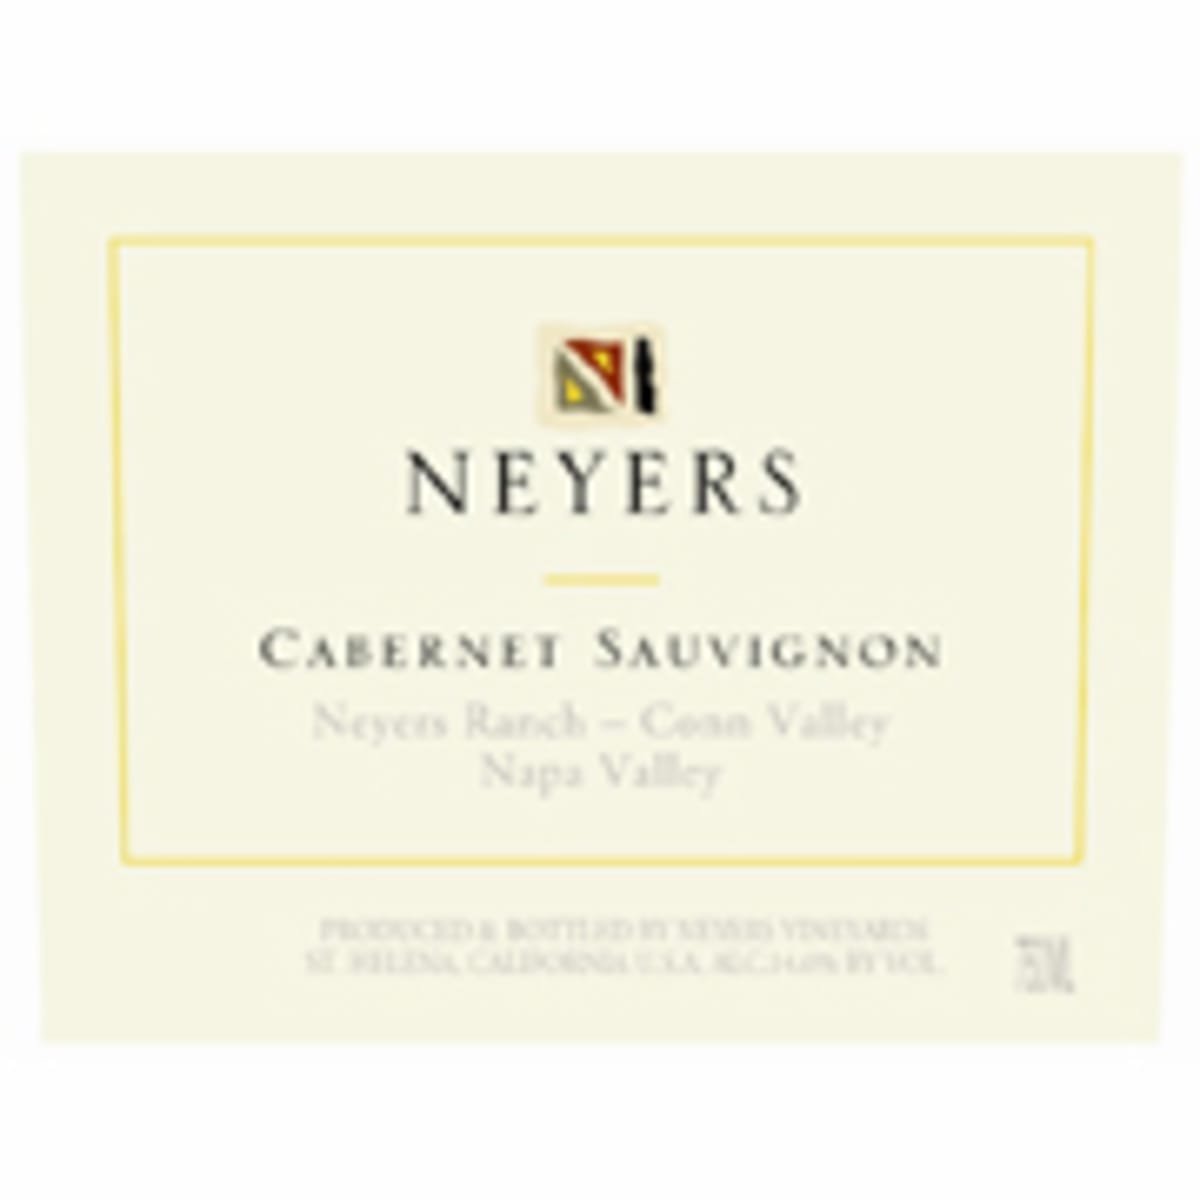 Neyers Neyers Ranch-Conn Valley Cabernet Sauvignon 2006 Front Label